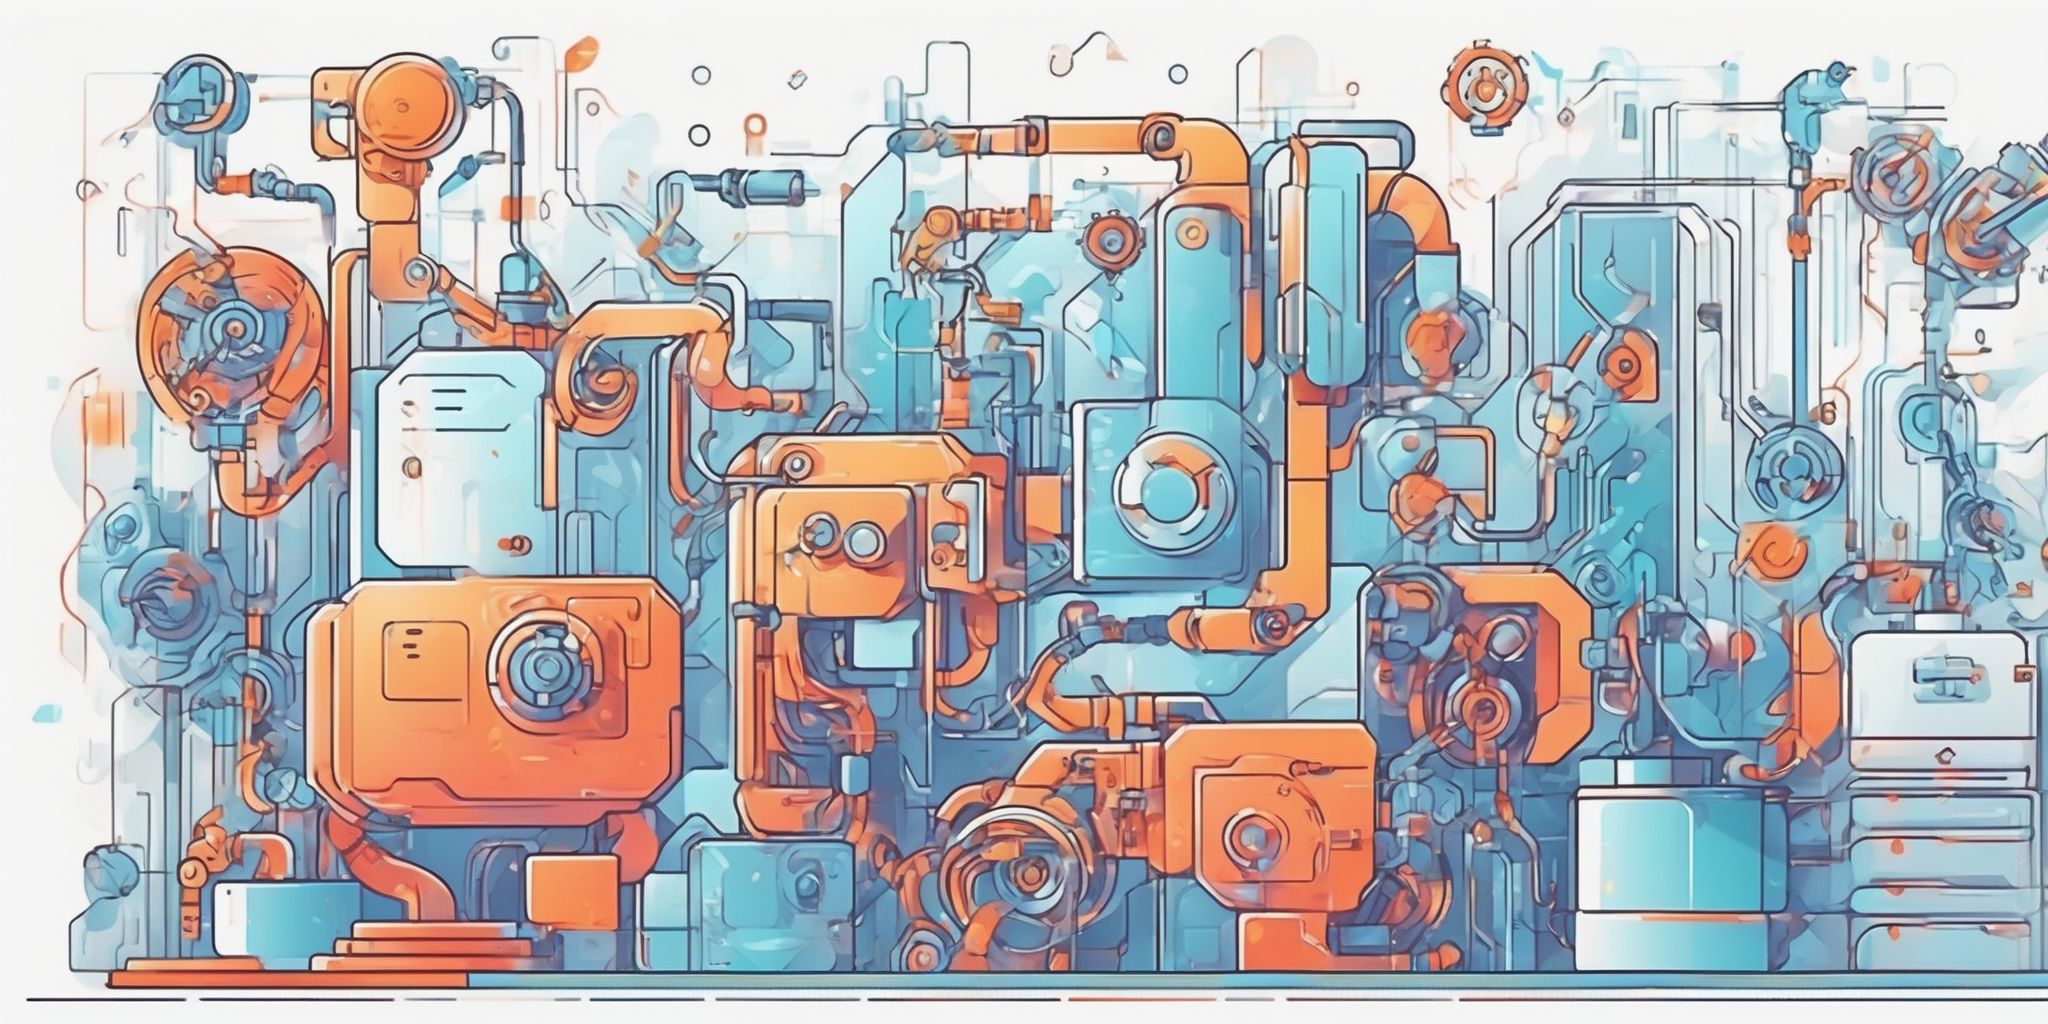 Efficiency automation in illustration style with gradients and white background